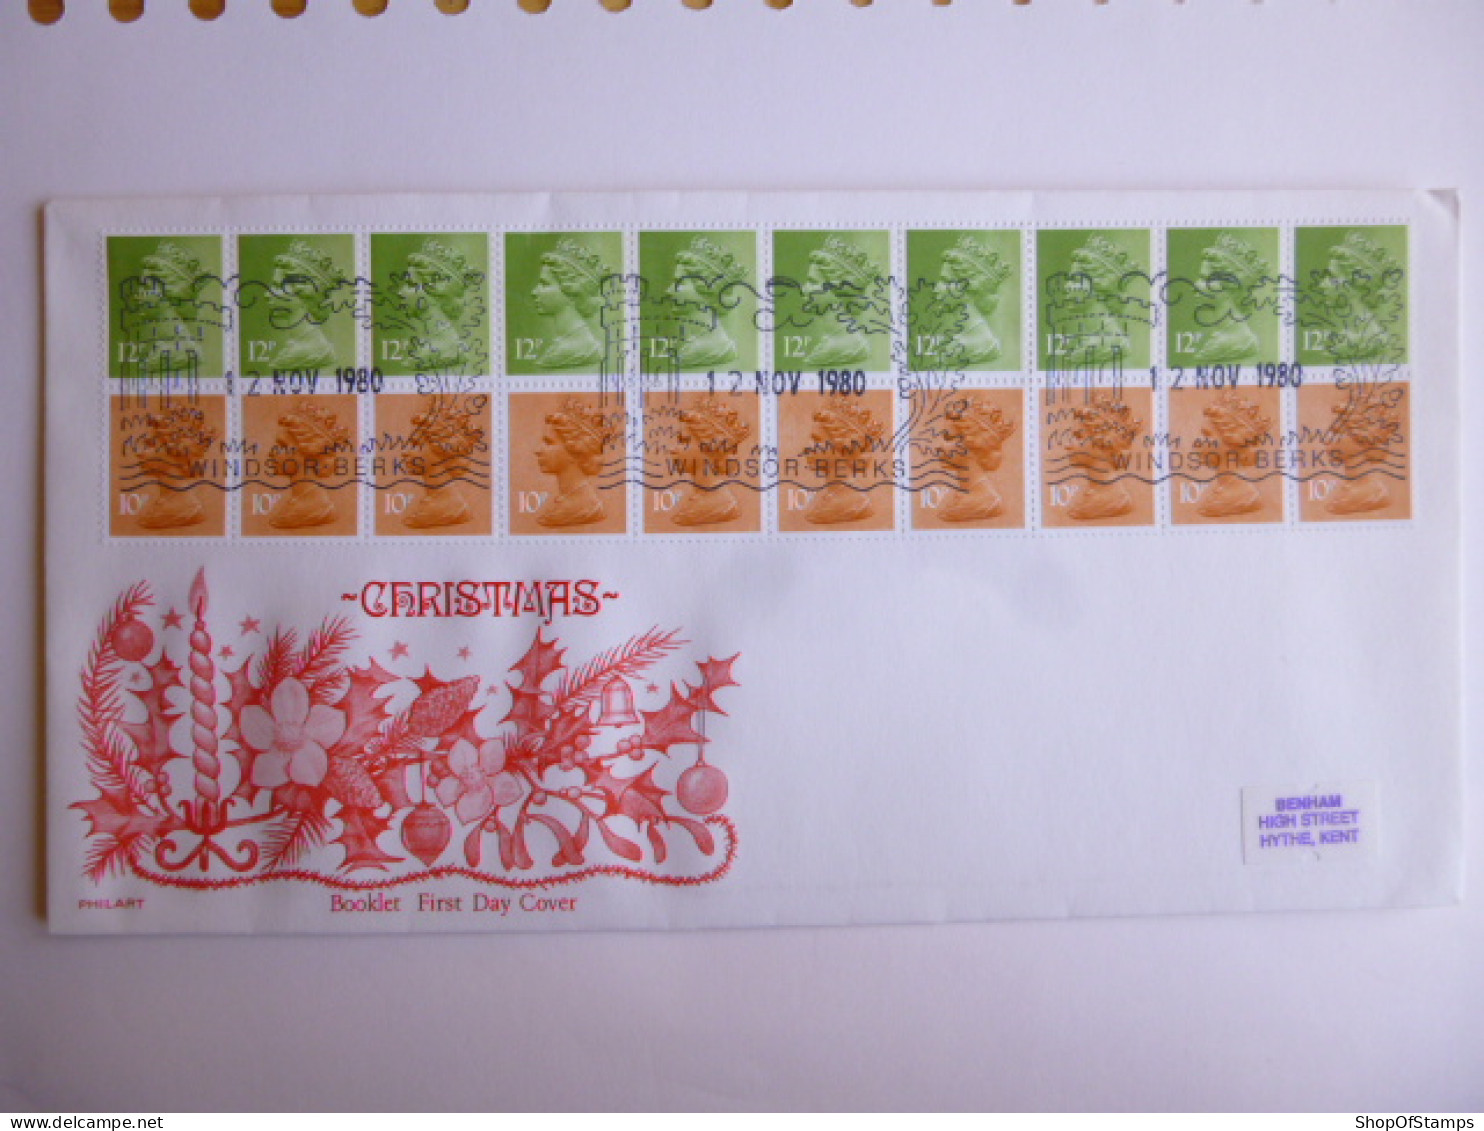 GREAT BRITAIN SG DEFINITIVES ISSUE DATED  12.11.80 FDC  - Unclassified